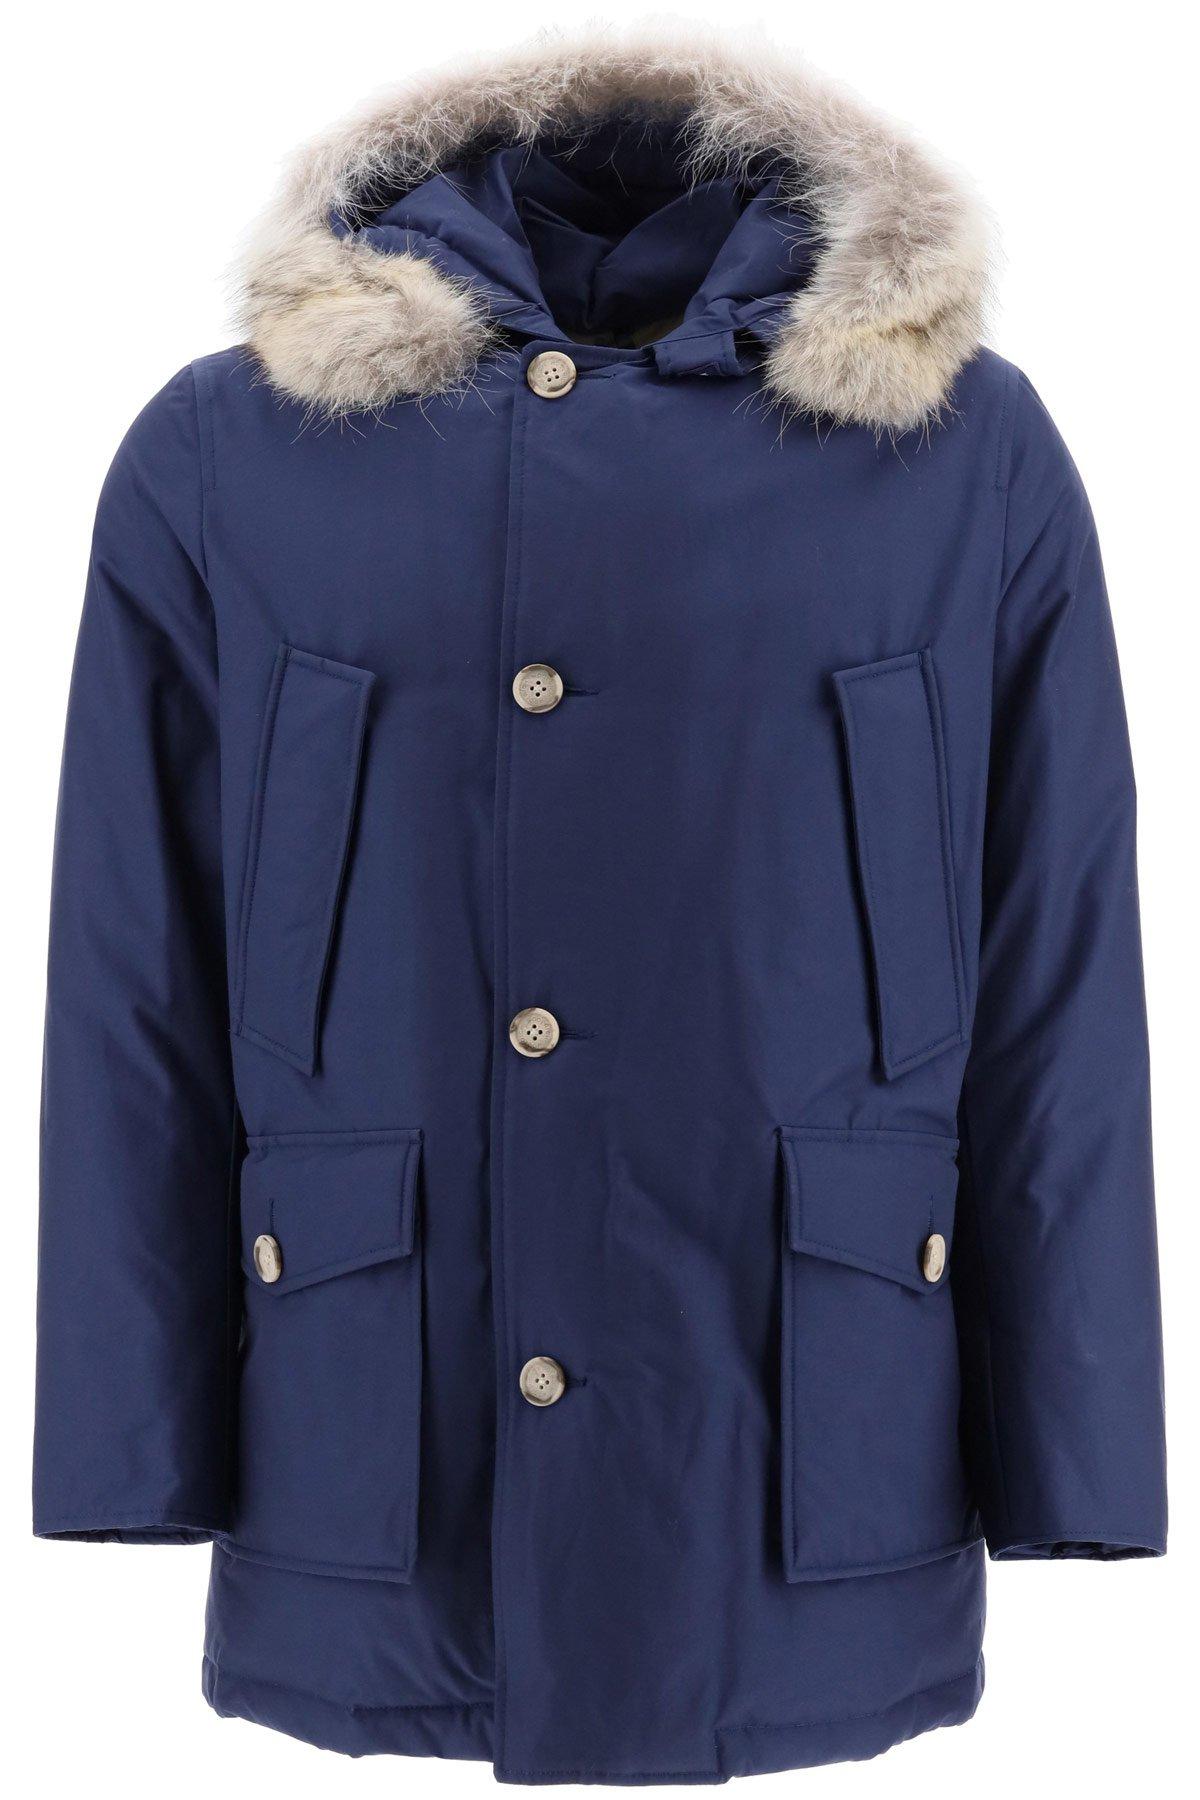 Woolrich Cotton Arctic Hooded Parka in Blue for Men - Save 11% - Lyst